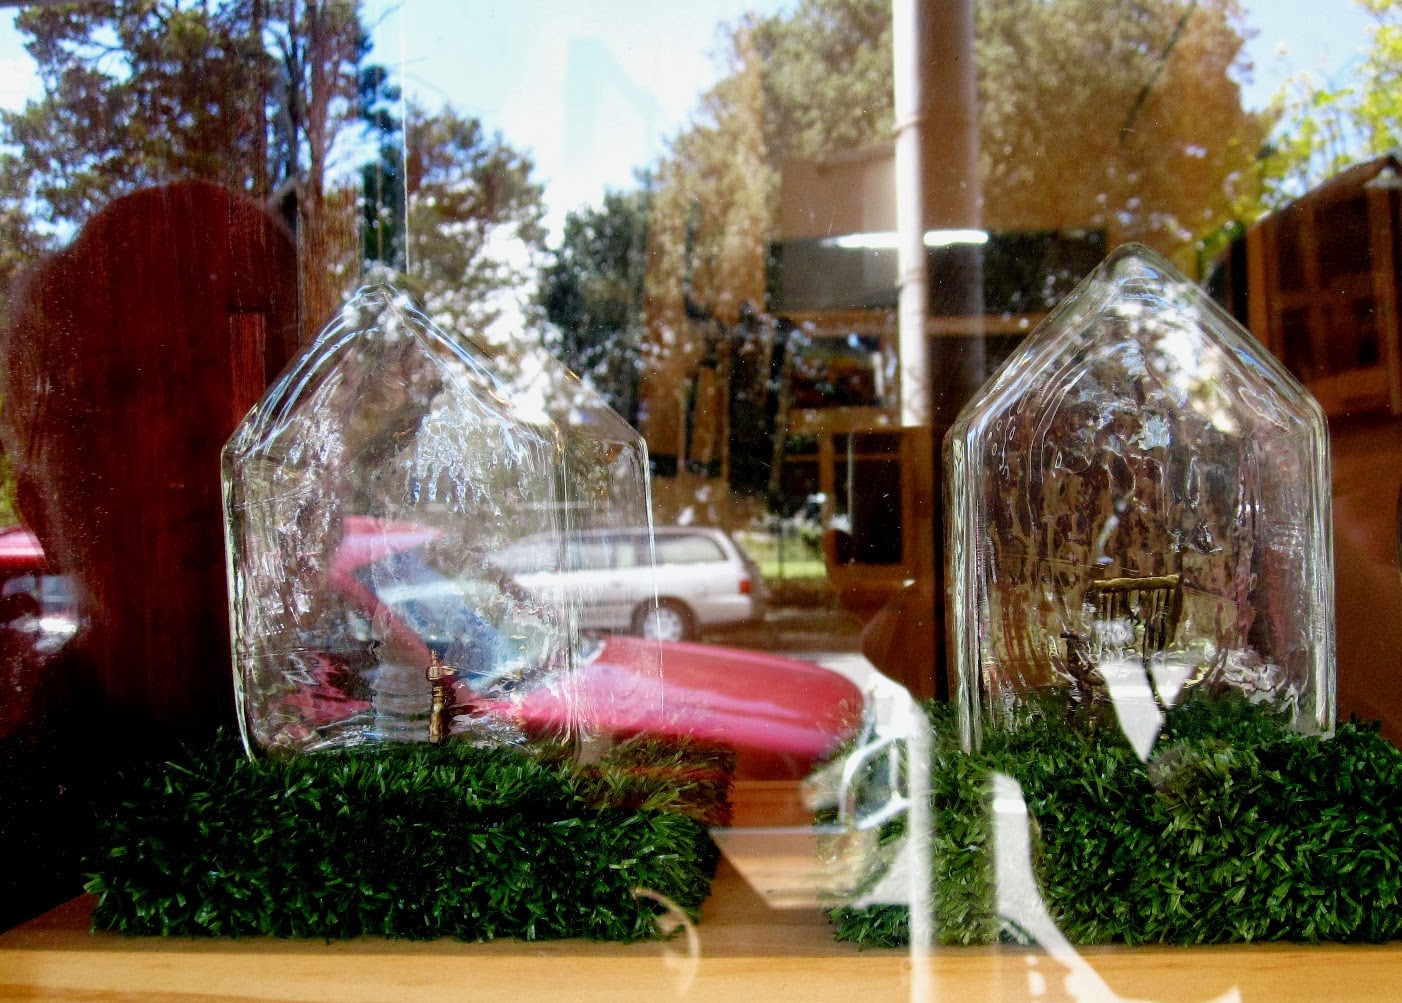 Handmade glass houses with miniature chairs inside, sitting on fake grass